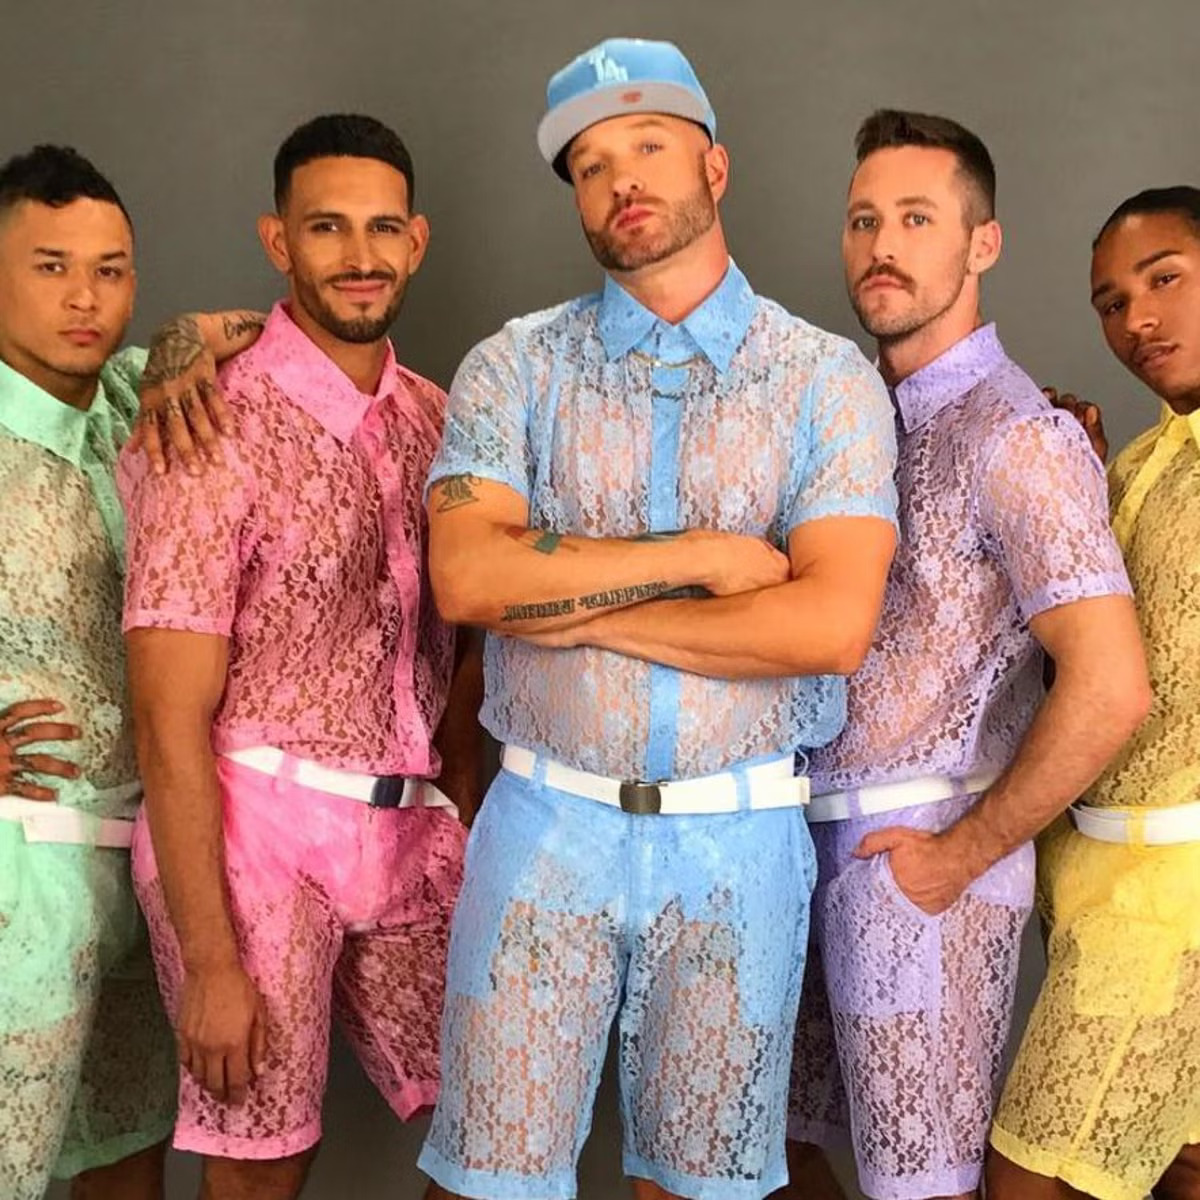 See Through Lace Shorts For Men Are Now A Thing For Summer